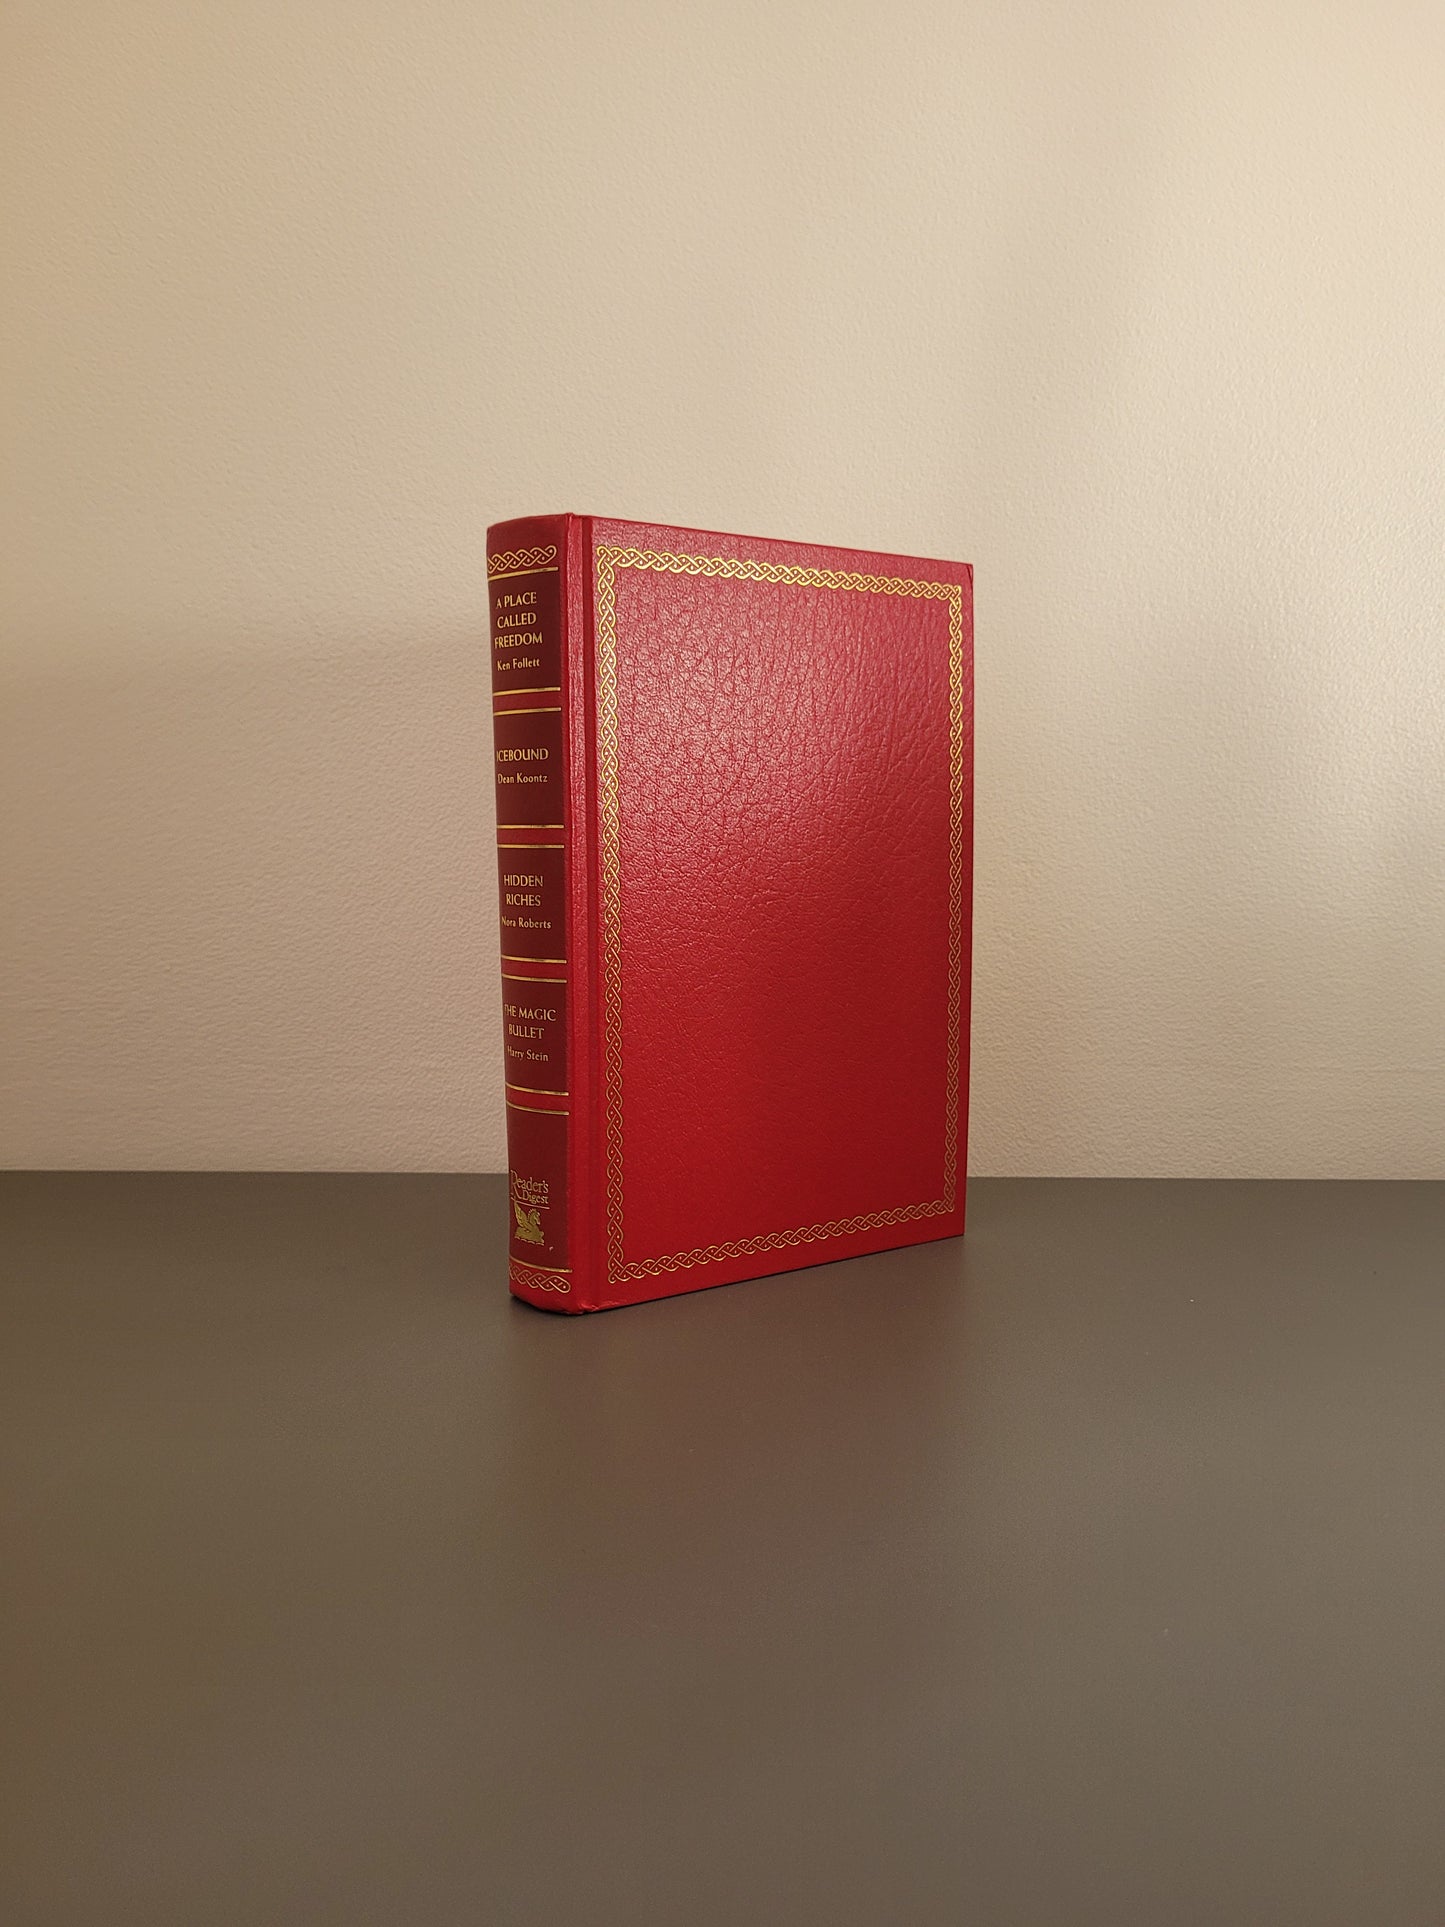 A picture of the front of the hardback - a red book with a golden border.